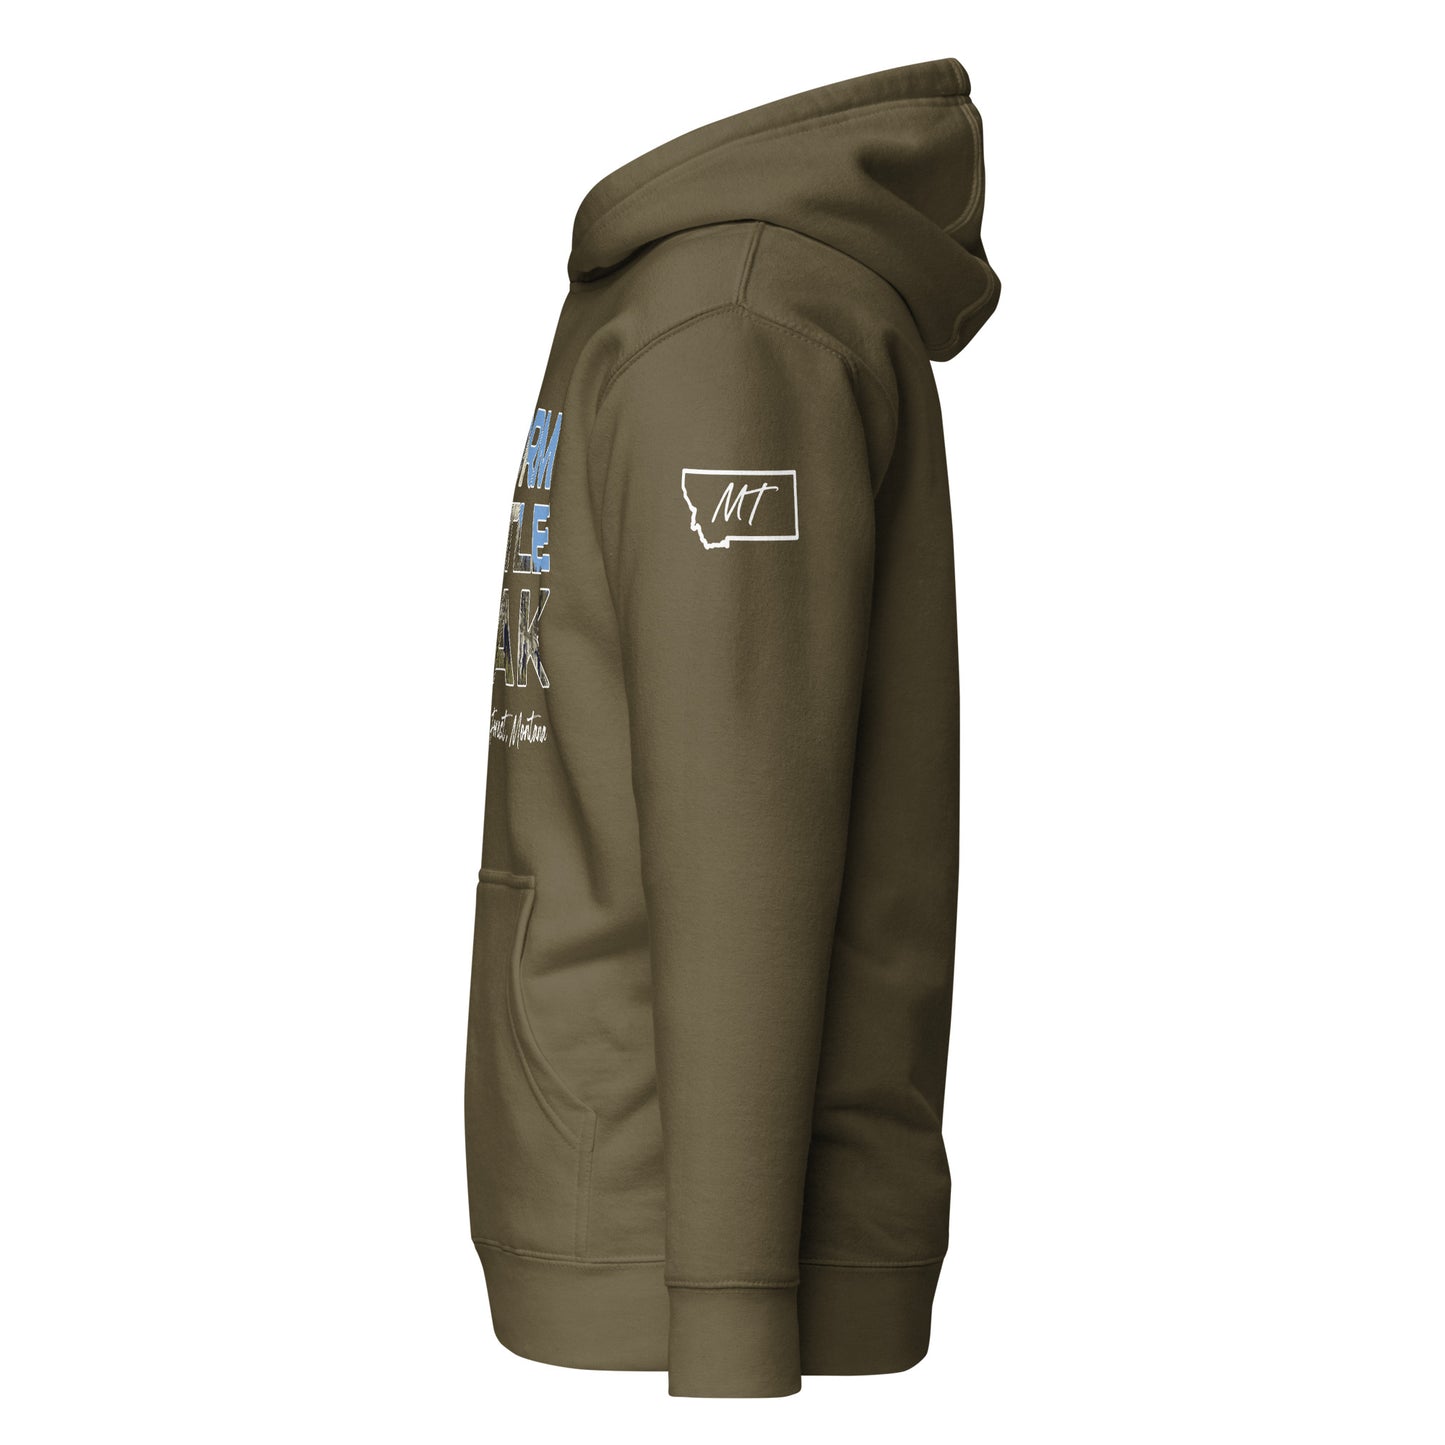 Left Side view of Storm Castle Peak in Custer Gallatin National Forest Montana Military Green Soft Hoodie from Park Attire